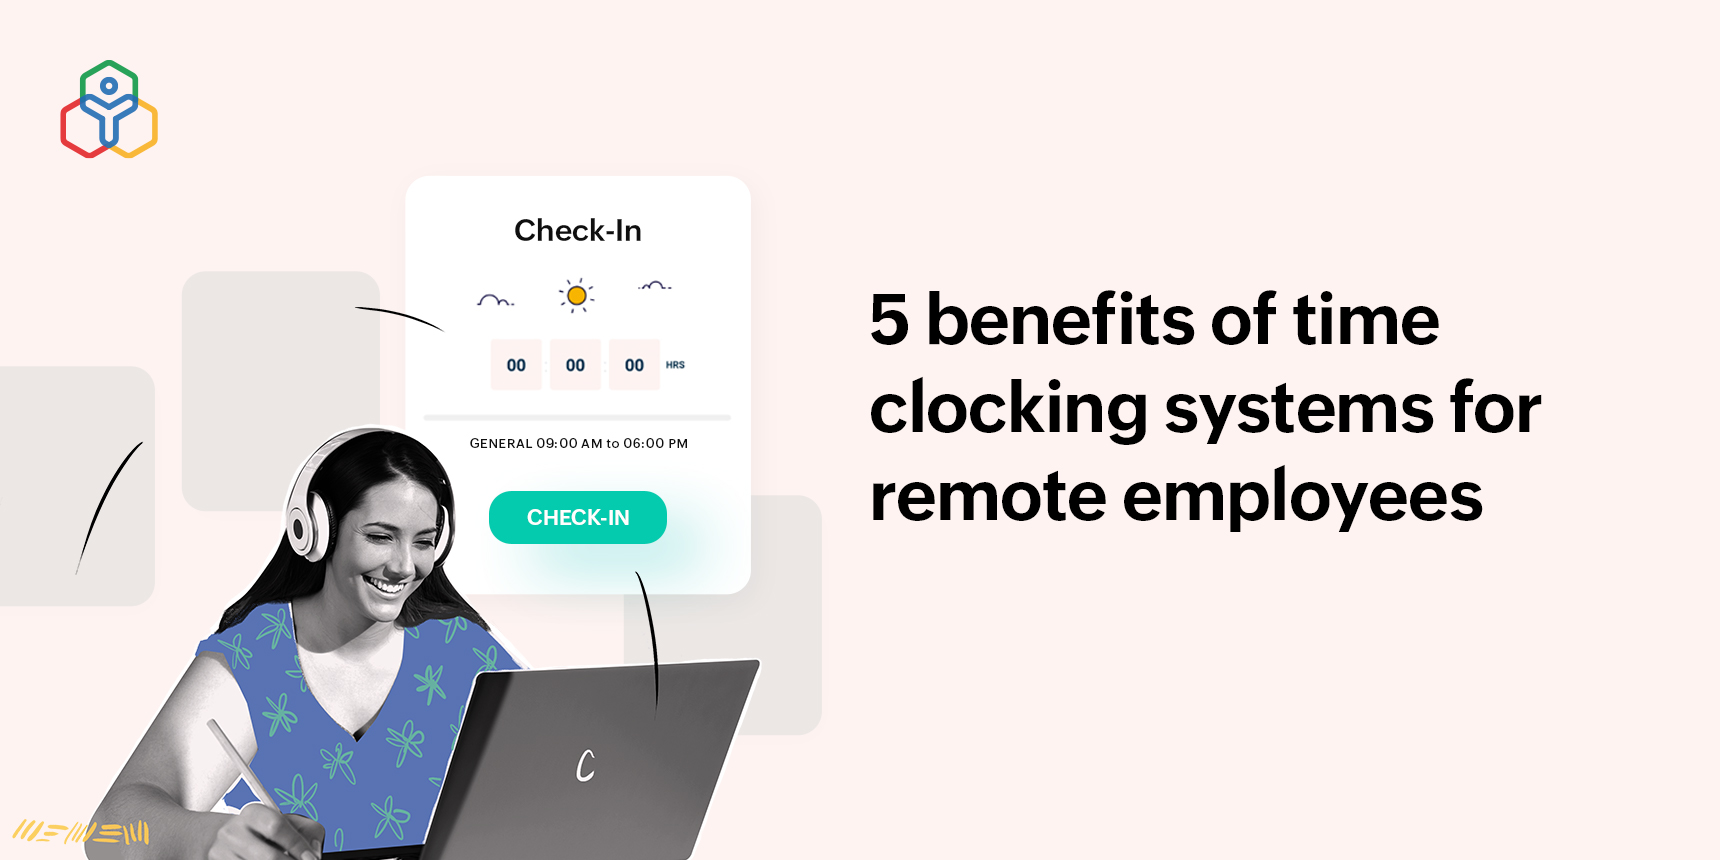 Time clocking system for remote employees